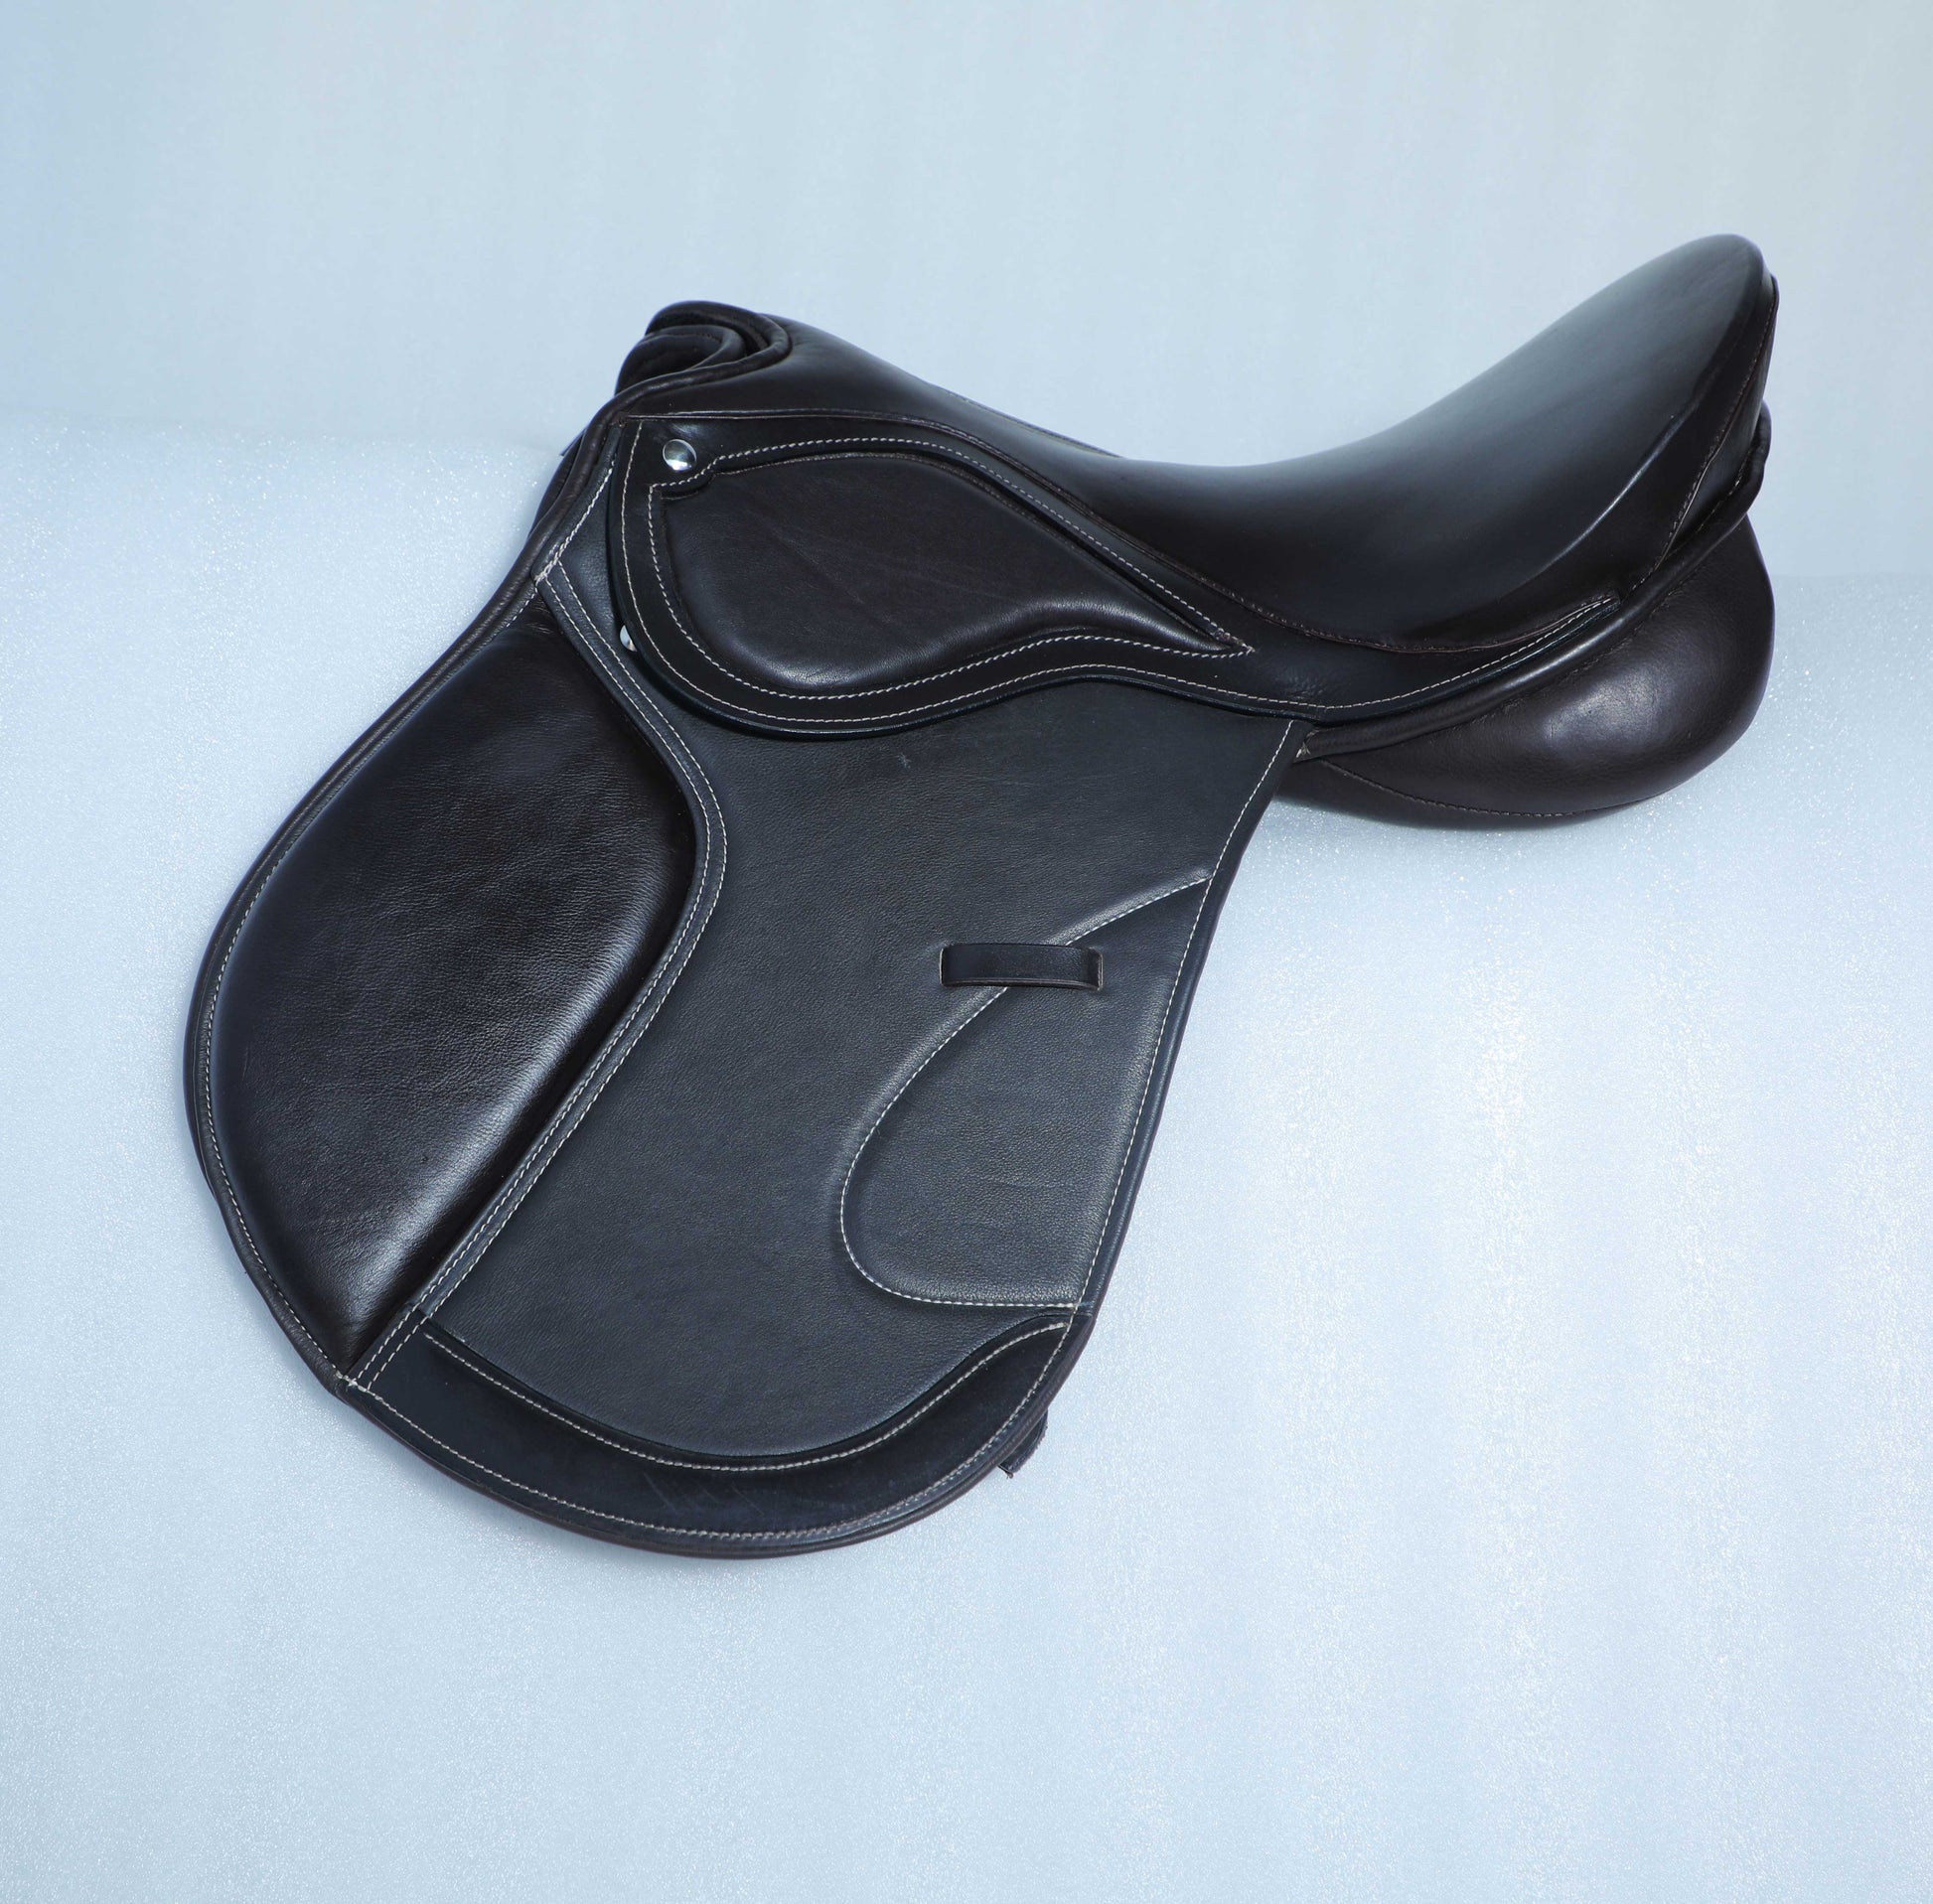 BLACK-LEATHER-HORSE-CHANGEABLE-GULLET-SADDLE.jpg